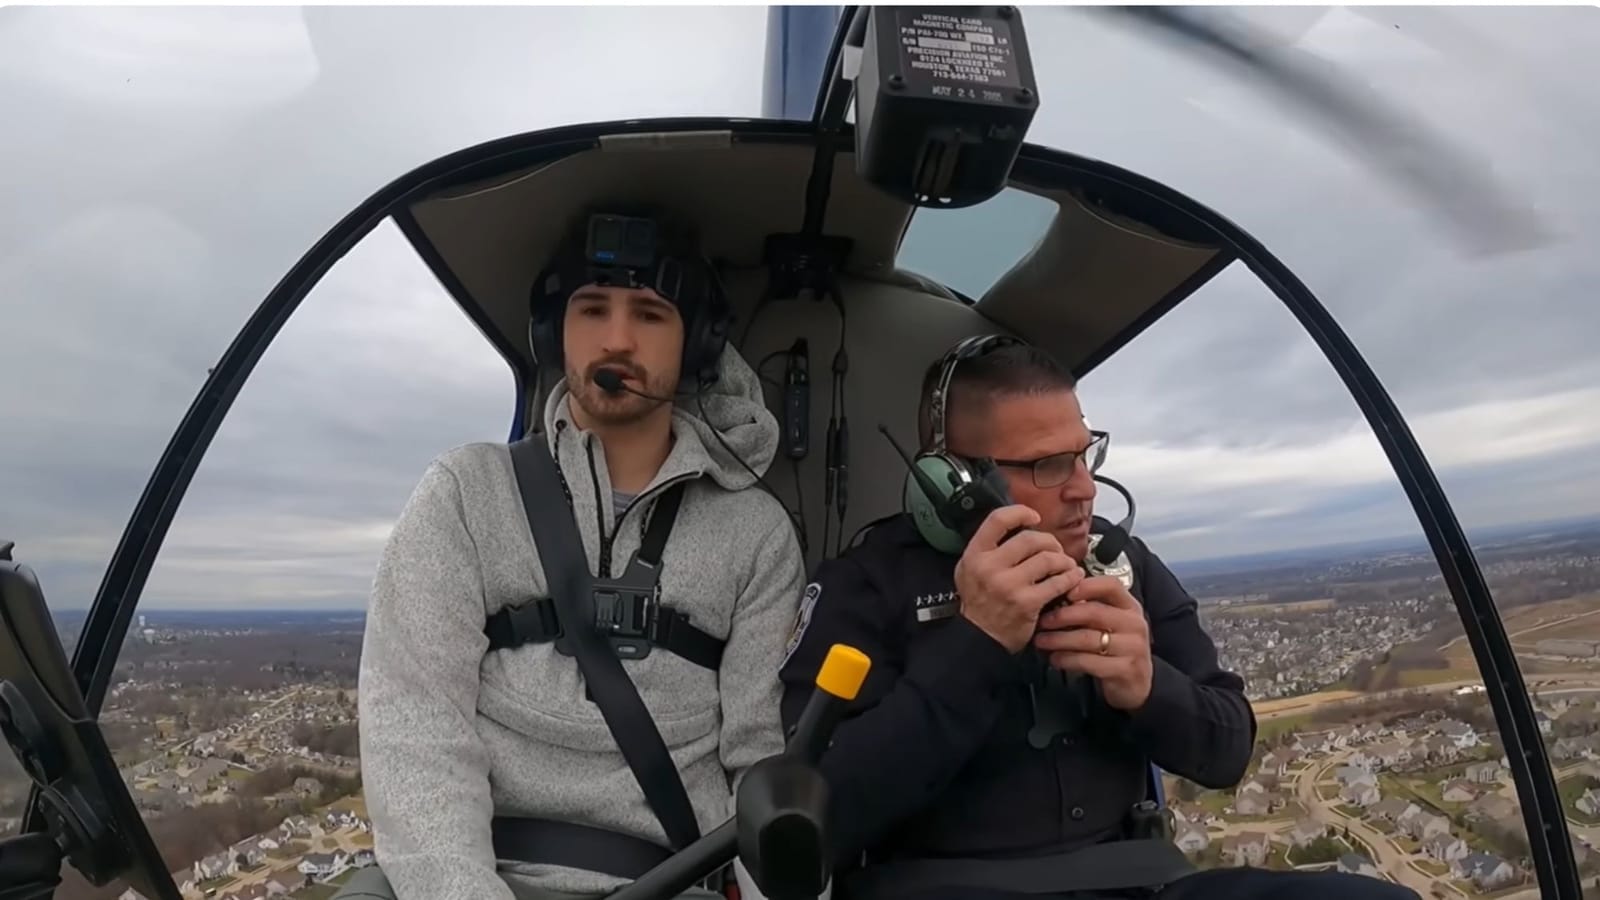 Retiring cop gets an unforgettable helicopter send-off, thanks to a YouTuber